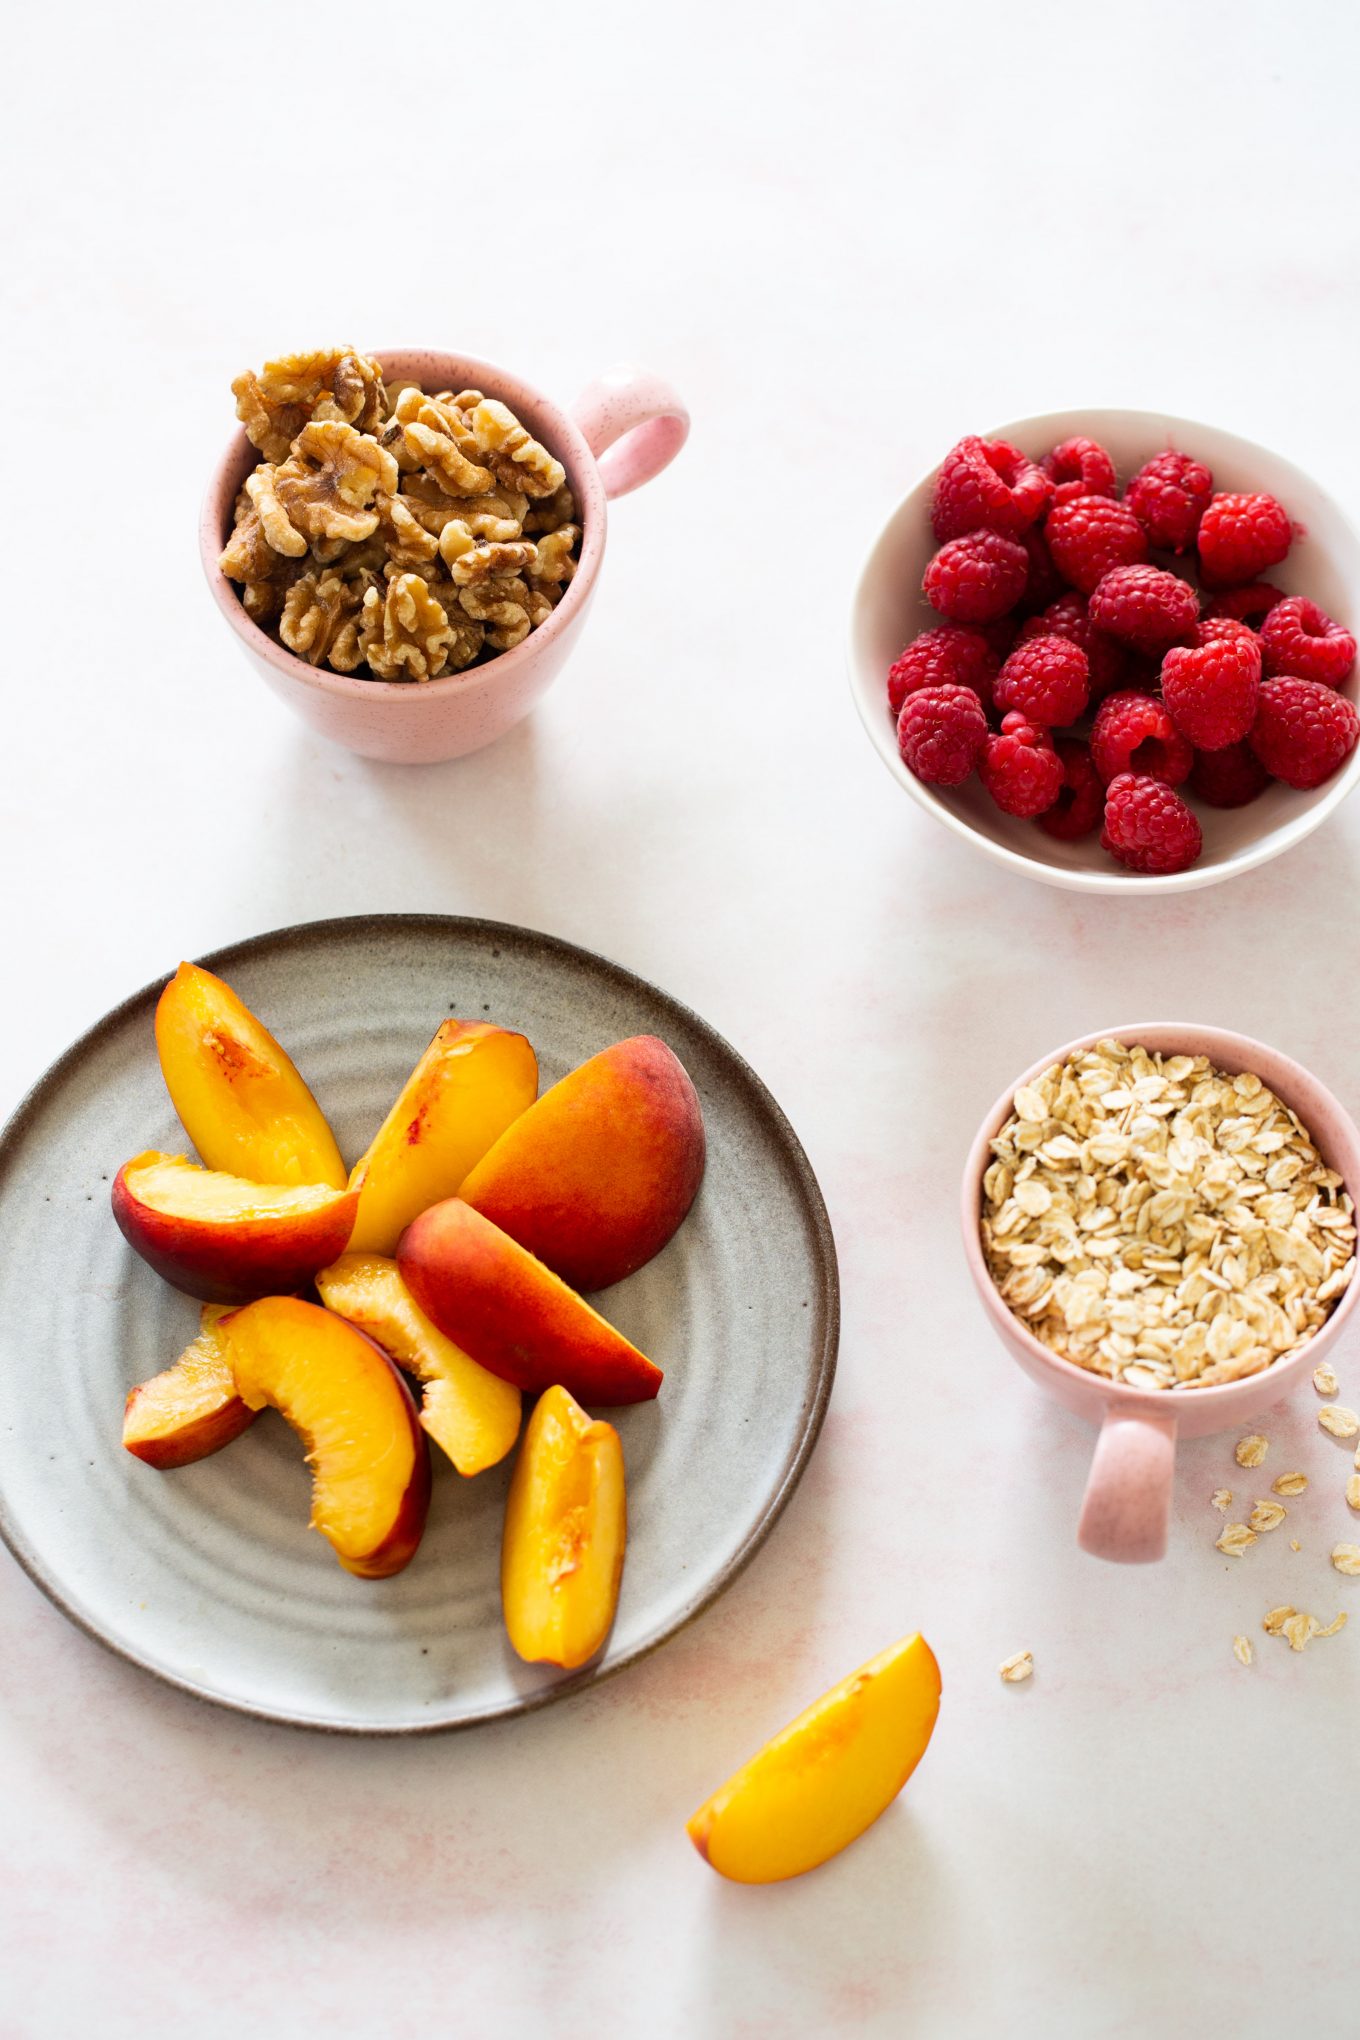 Peaches, raspberries, nuts and oats in dishes